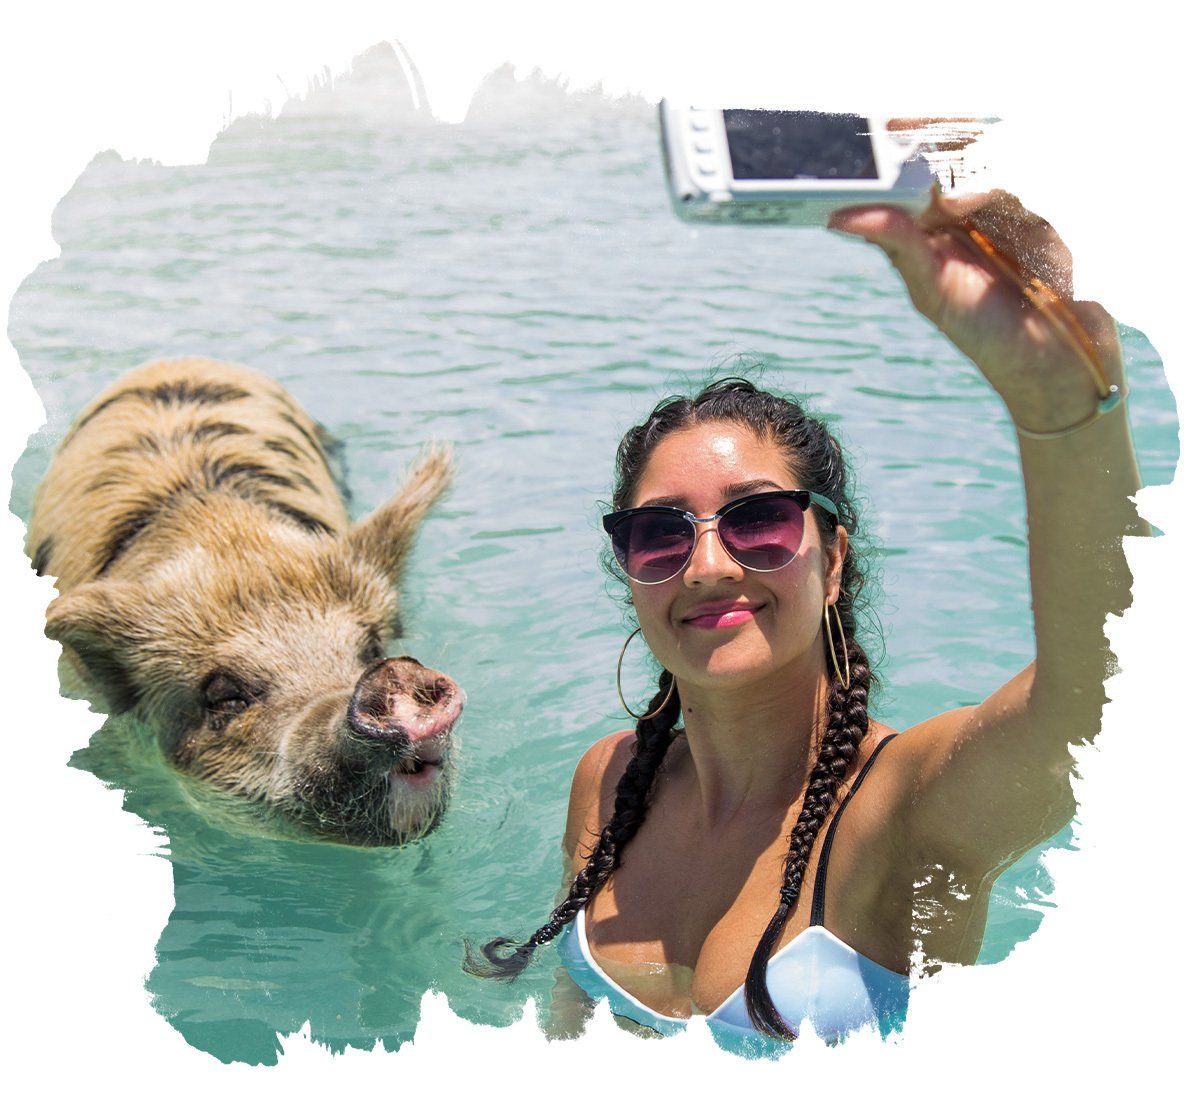 woman took a selfie with the pig